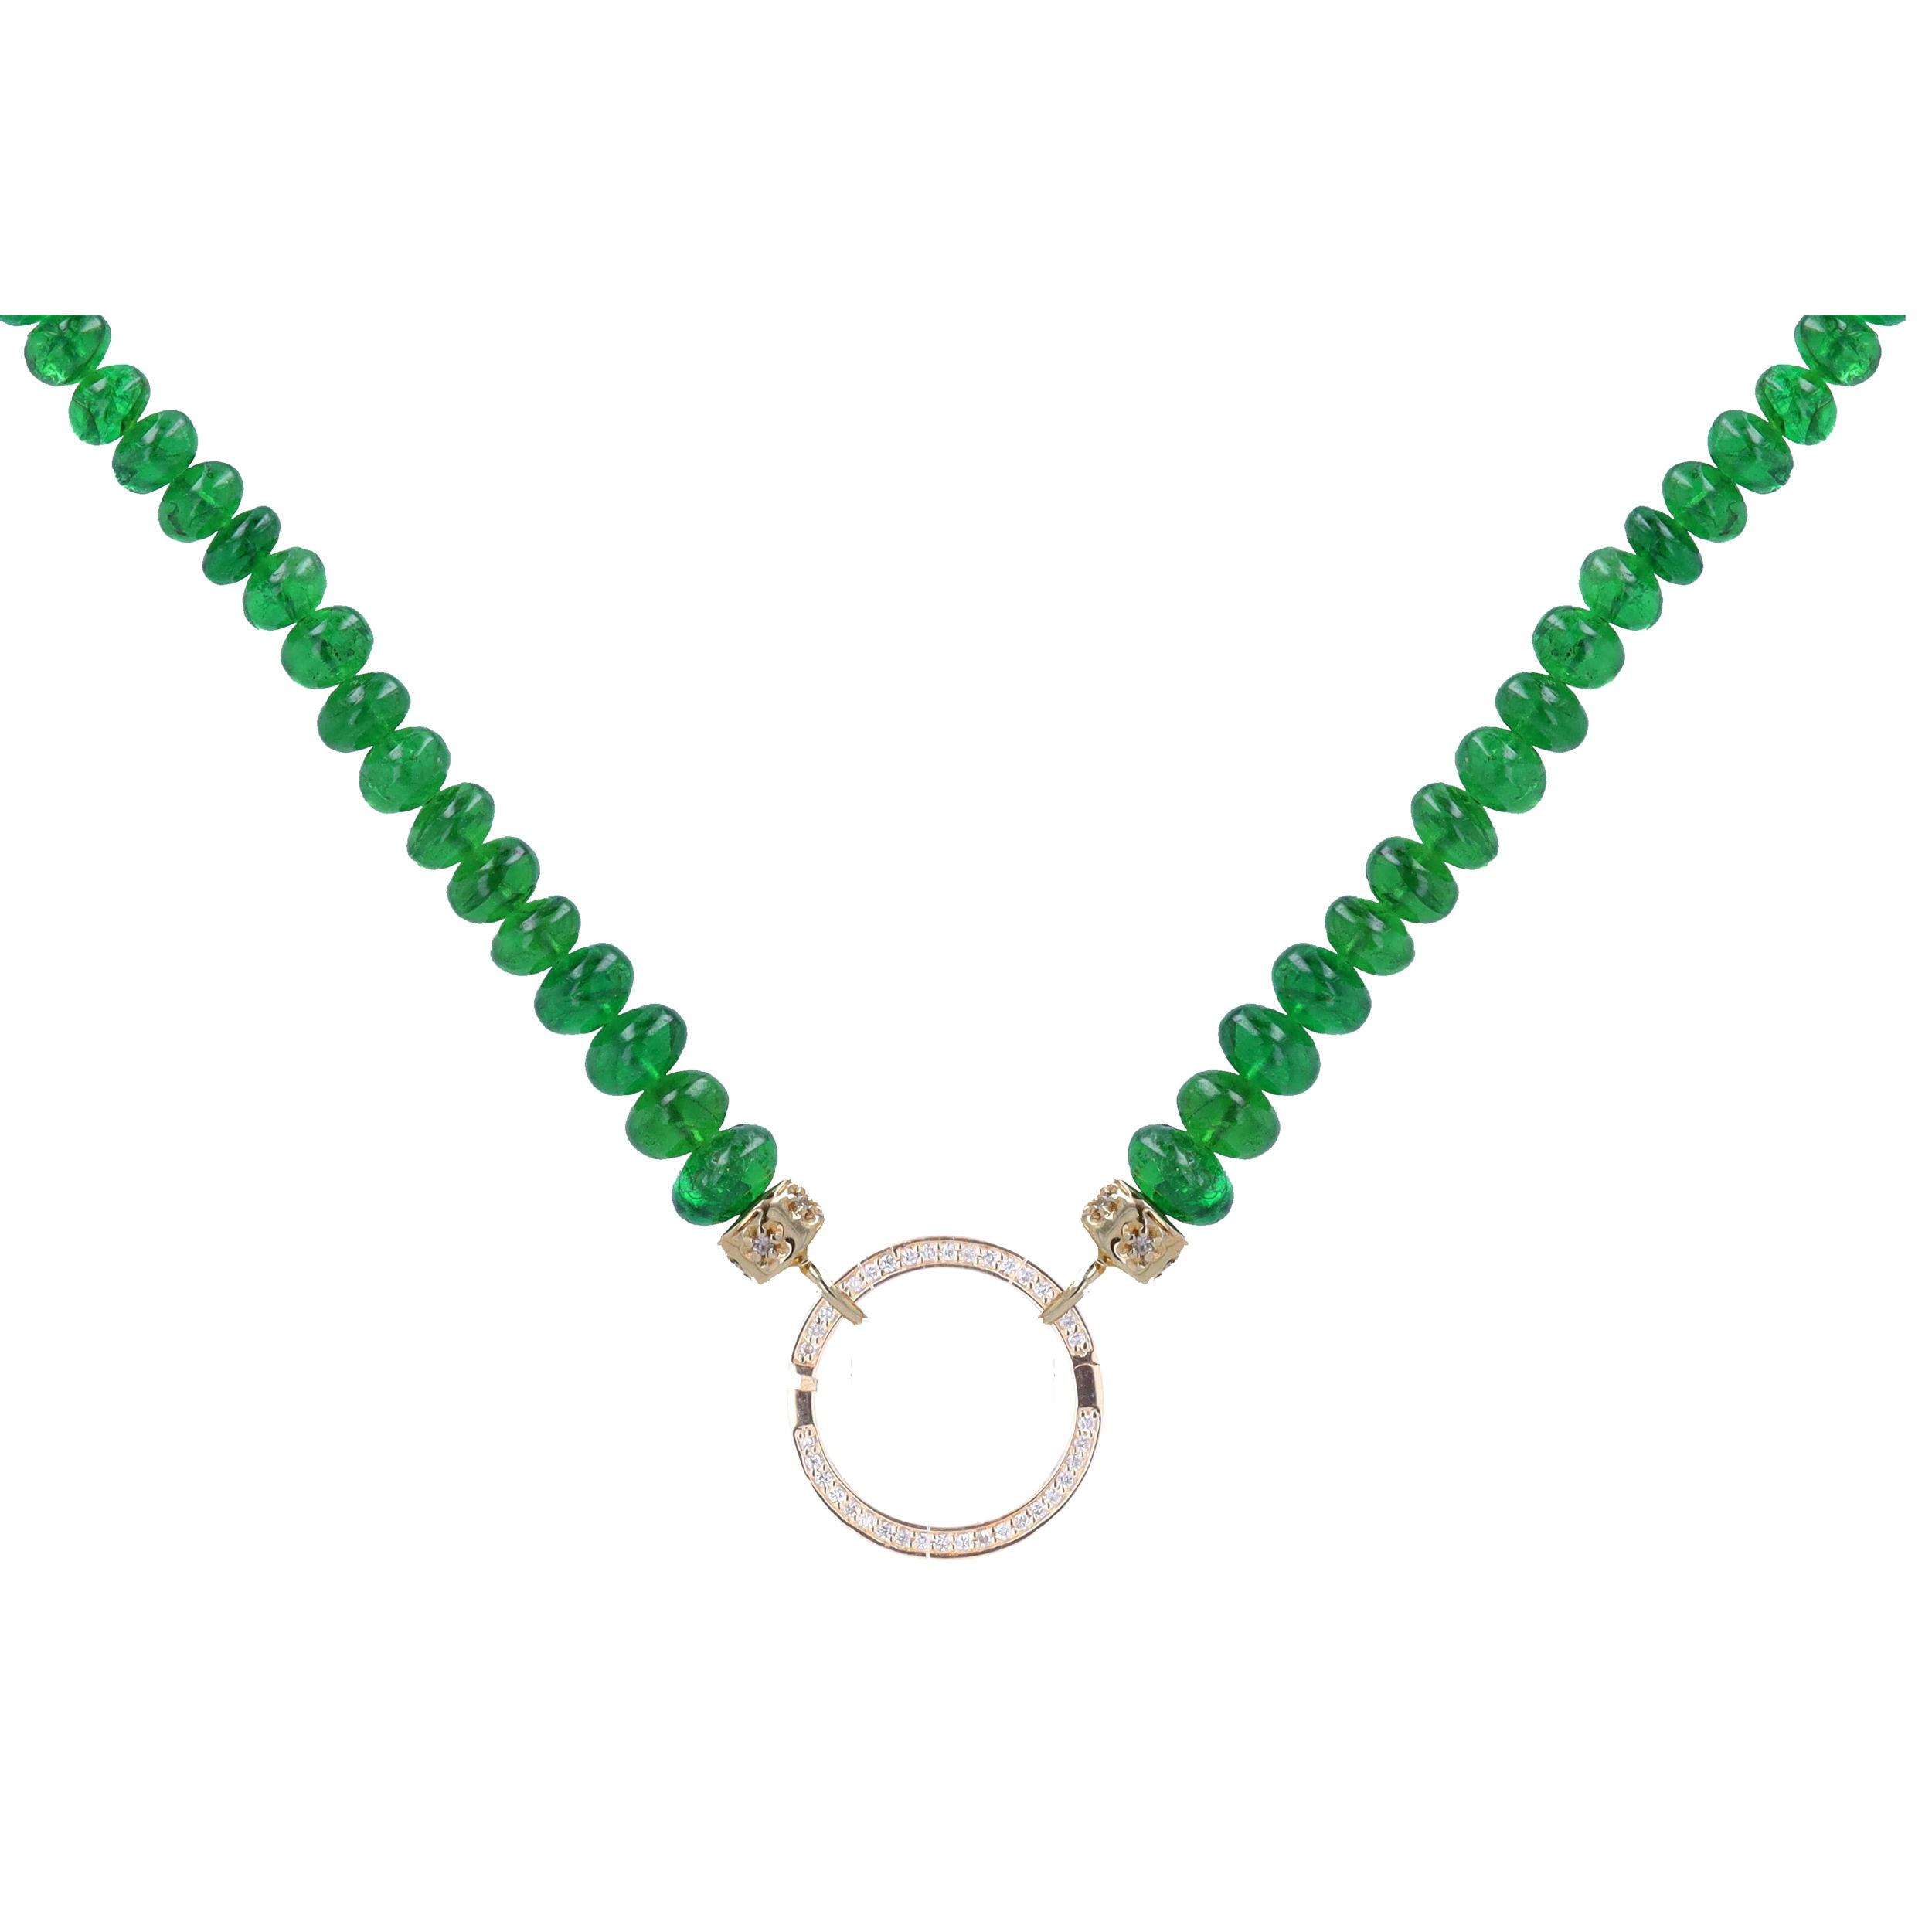 22" ~5mm Hand Polished Translucent Emerald Beaded Chain With 14k Gold Extension, and end Caps with Large Circle